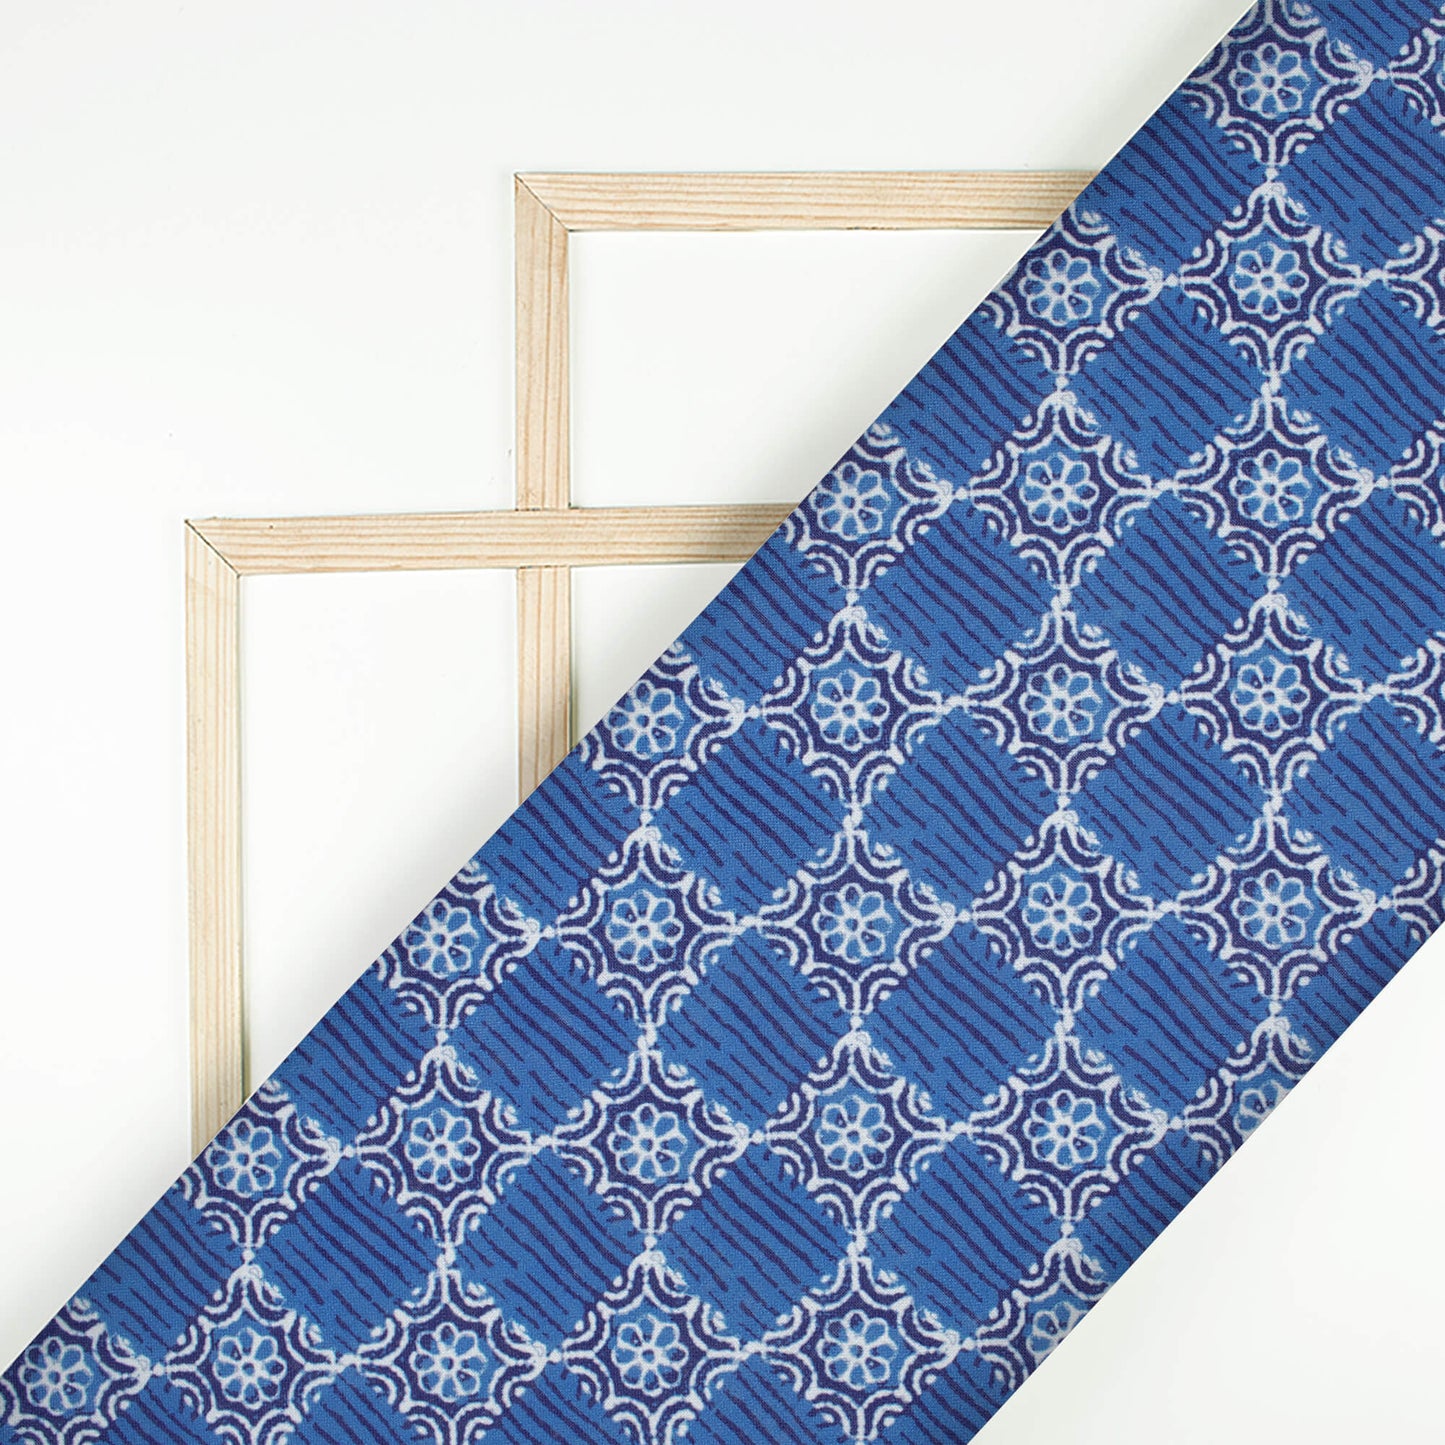 Blue And White Indigo Pattern Digital Print Linen Textured Fabric (Width 56 Inches)